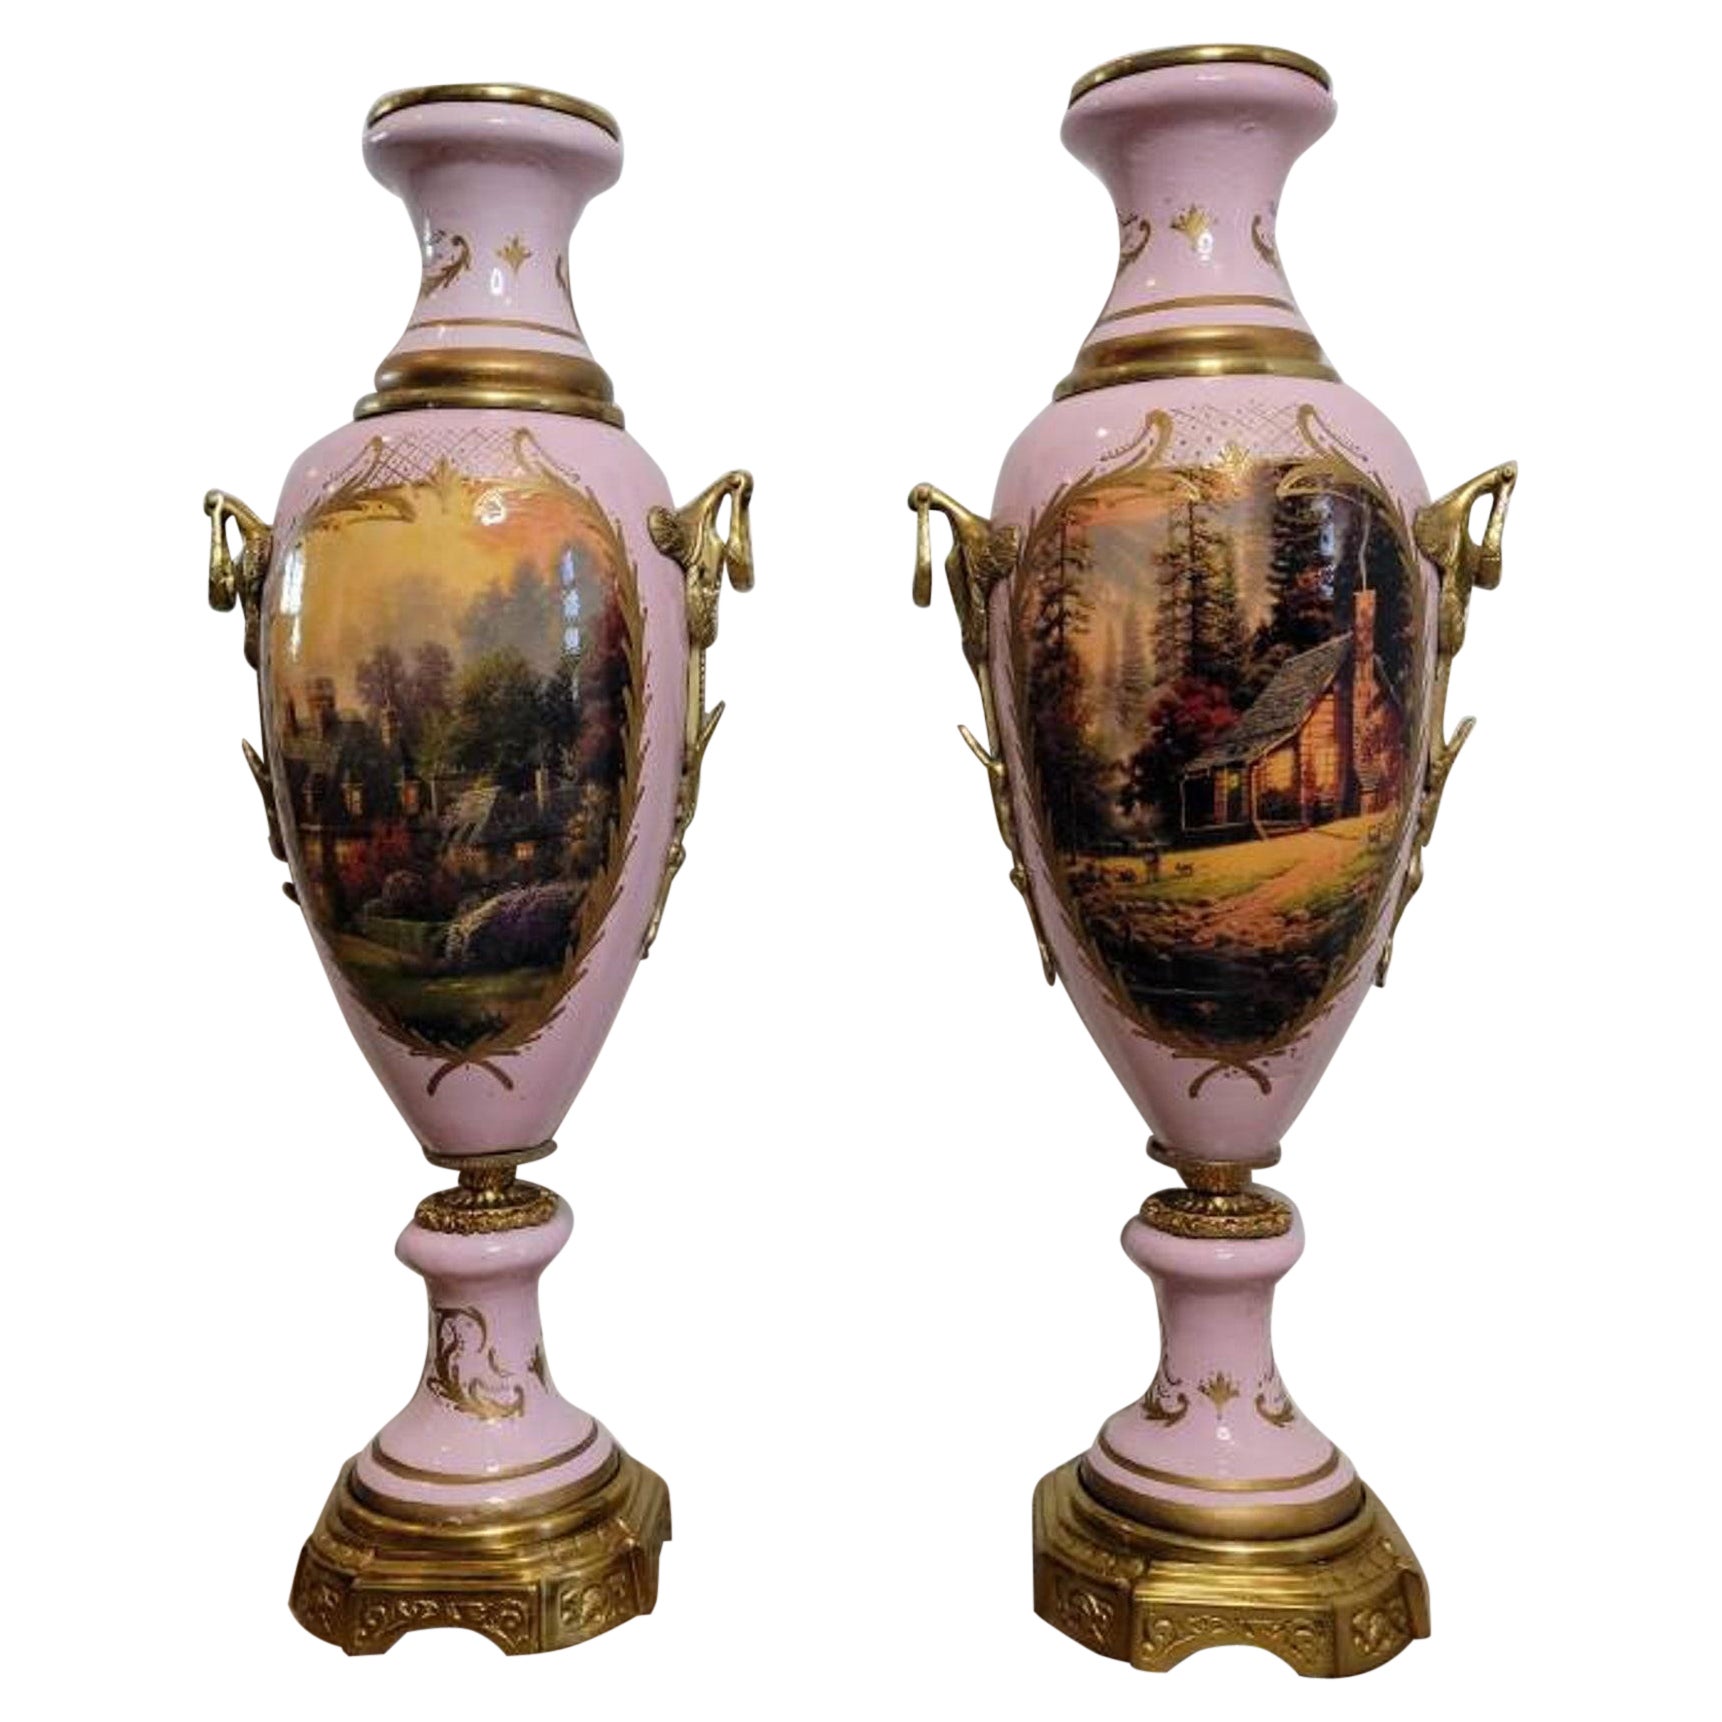 Monumental 19th Century French Empire Sèvres Style Porcelain Urns, a Pair For Sale